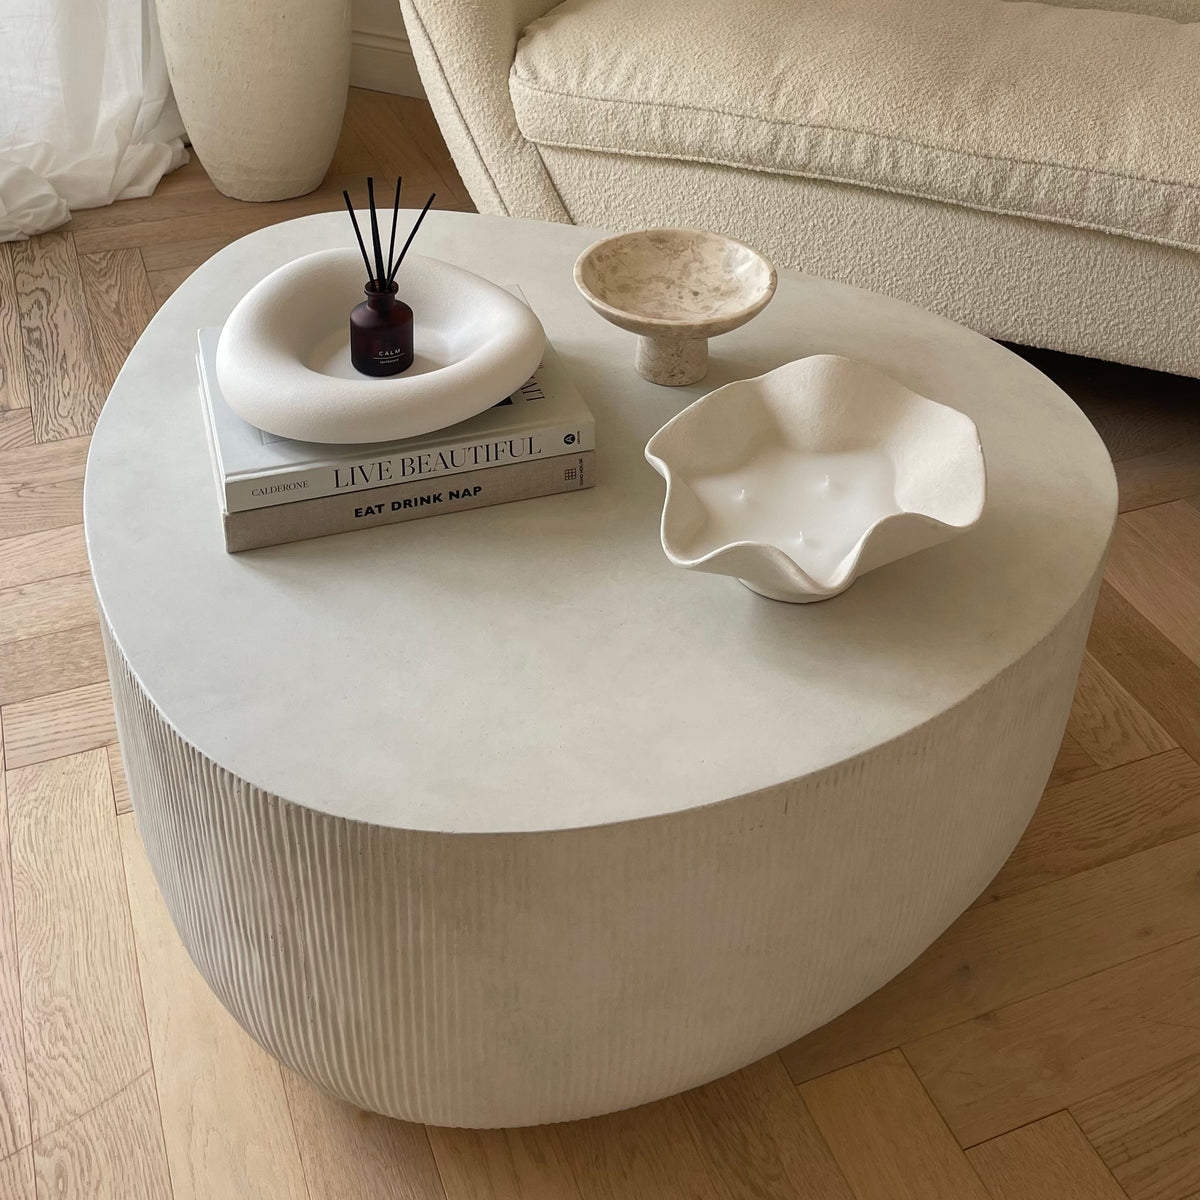 Minimal Concrete Irregular Shaped Coffee Table Large in a typical setting, candles unlit